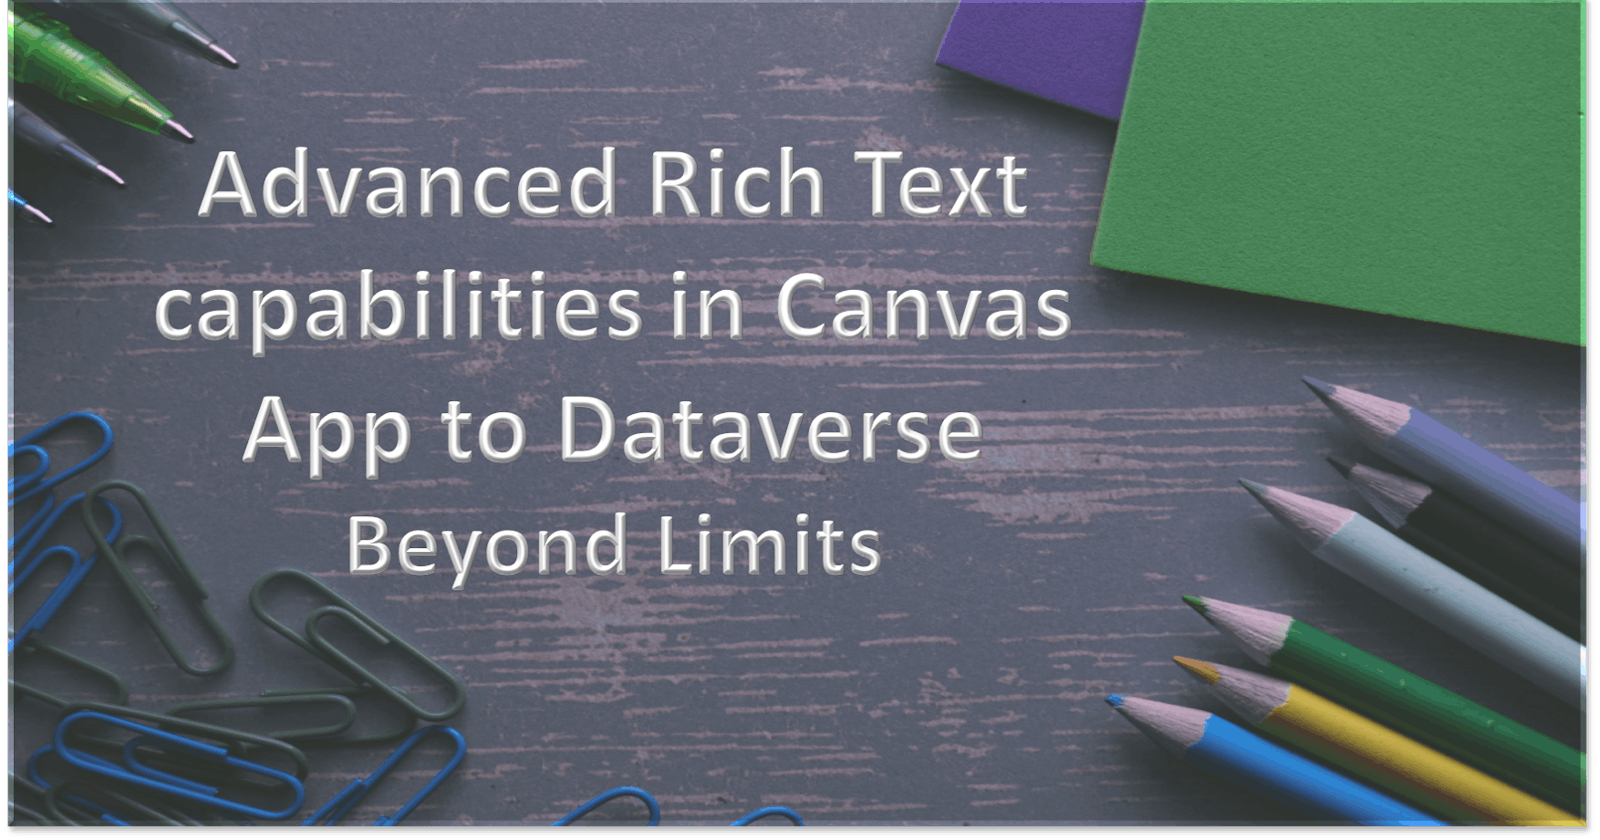 Advanced Rich Text capabilities in Canvas App to Dataverse - Beyond Limits